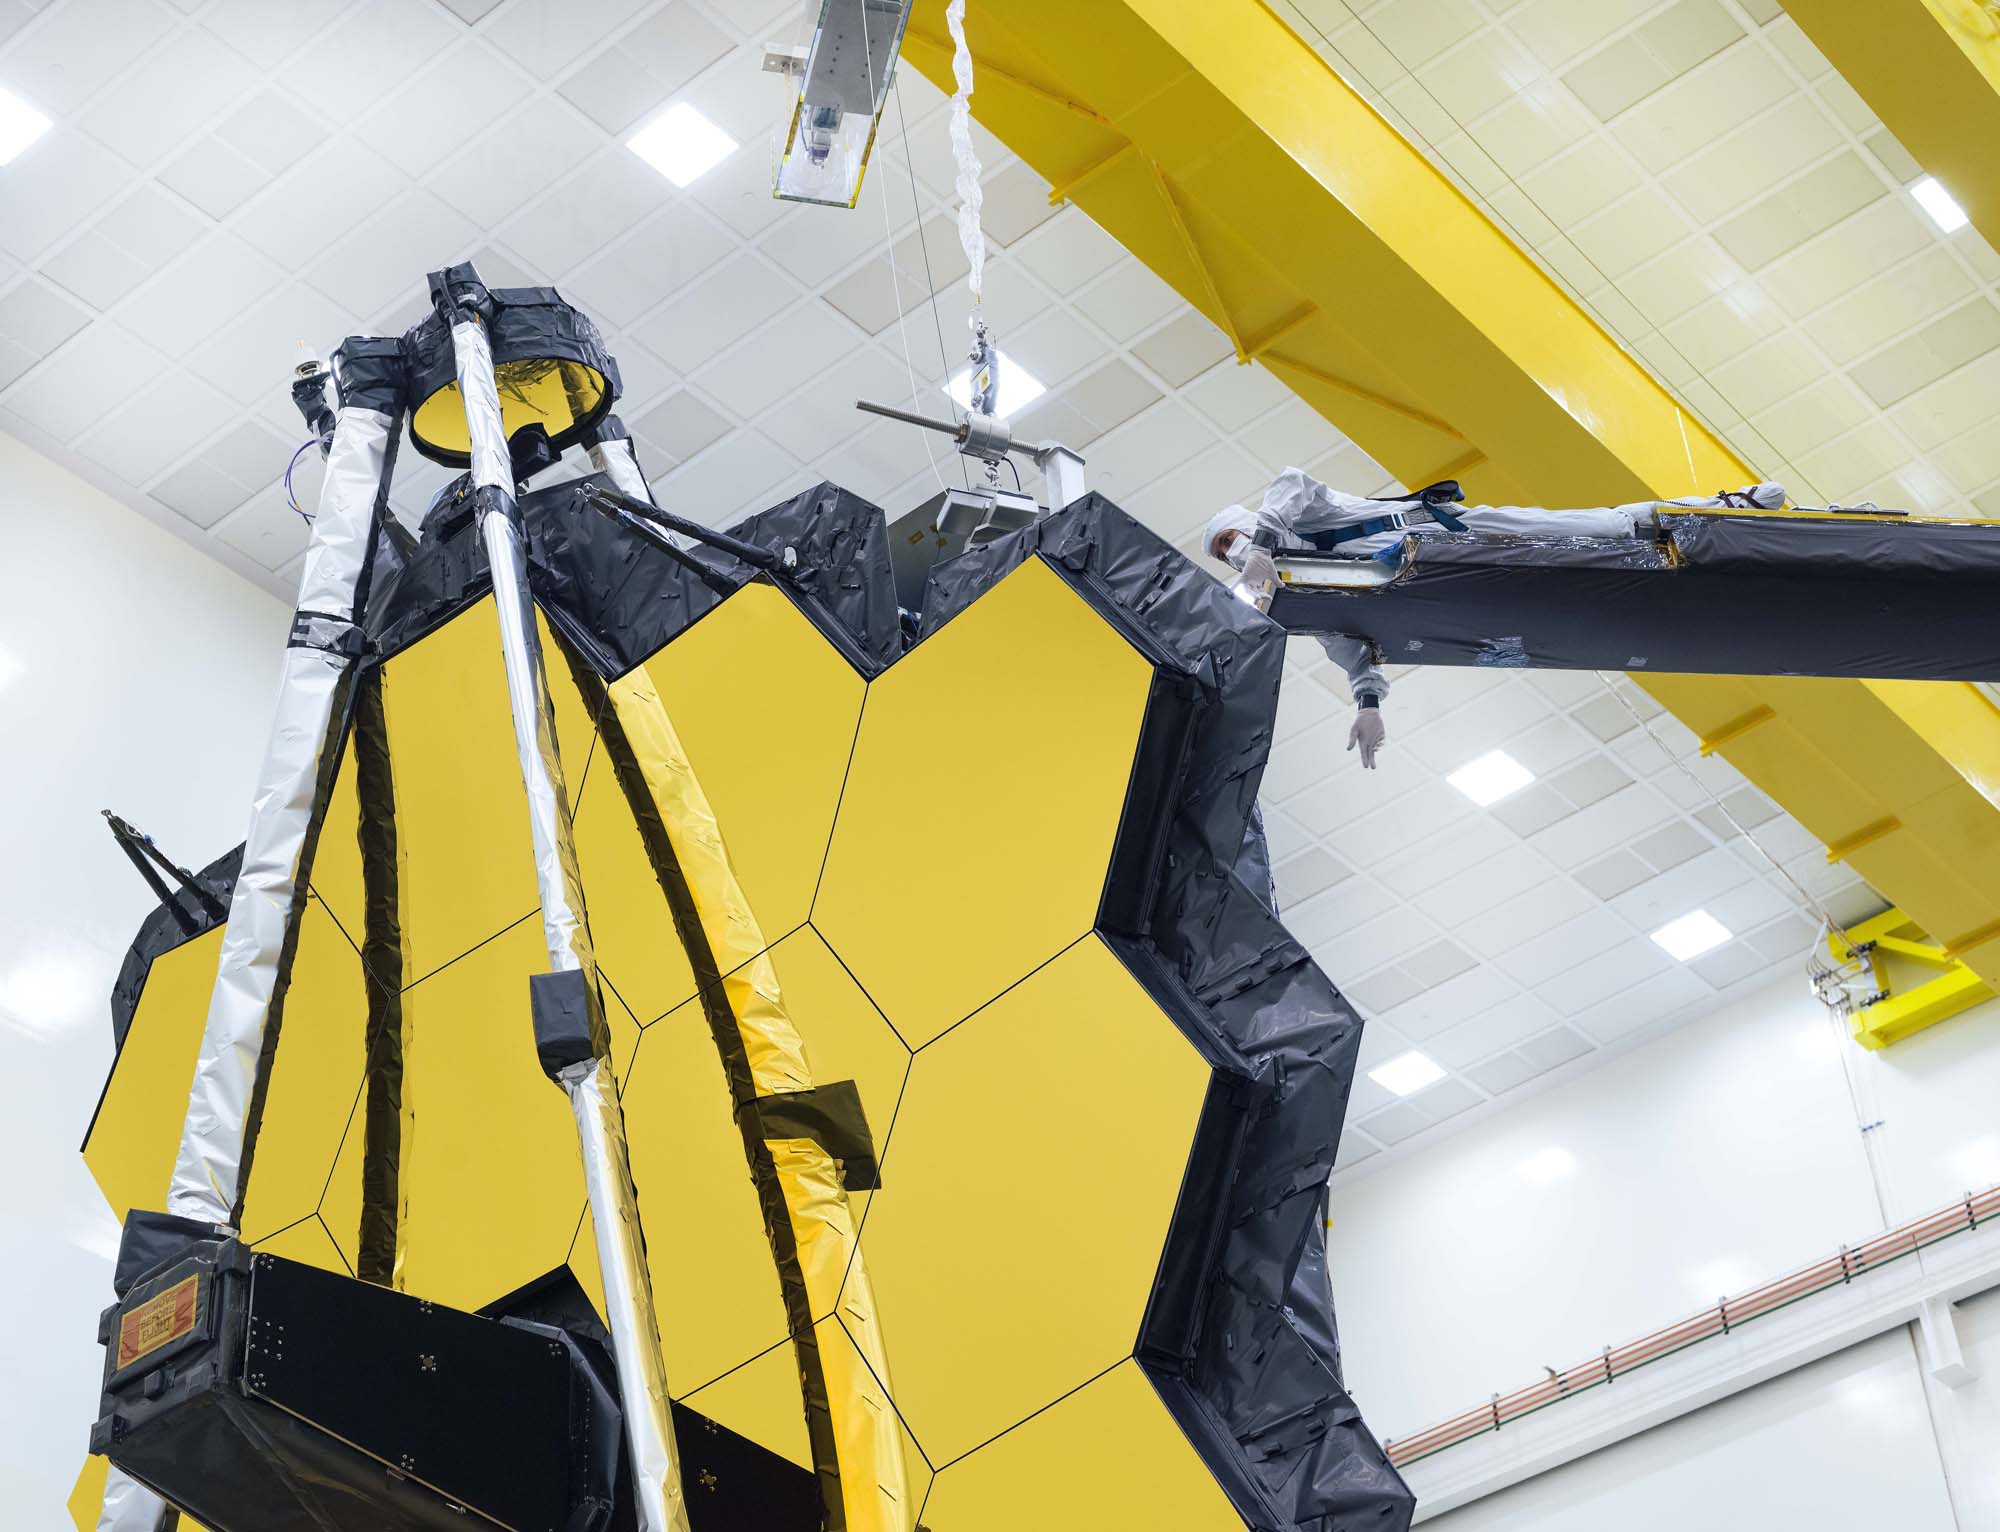 NASA's James Webb Space Telescope unfolds its giant mirror for last